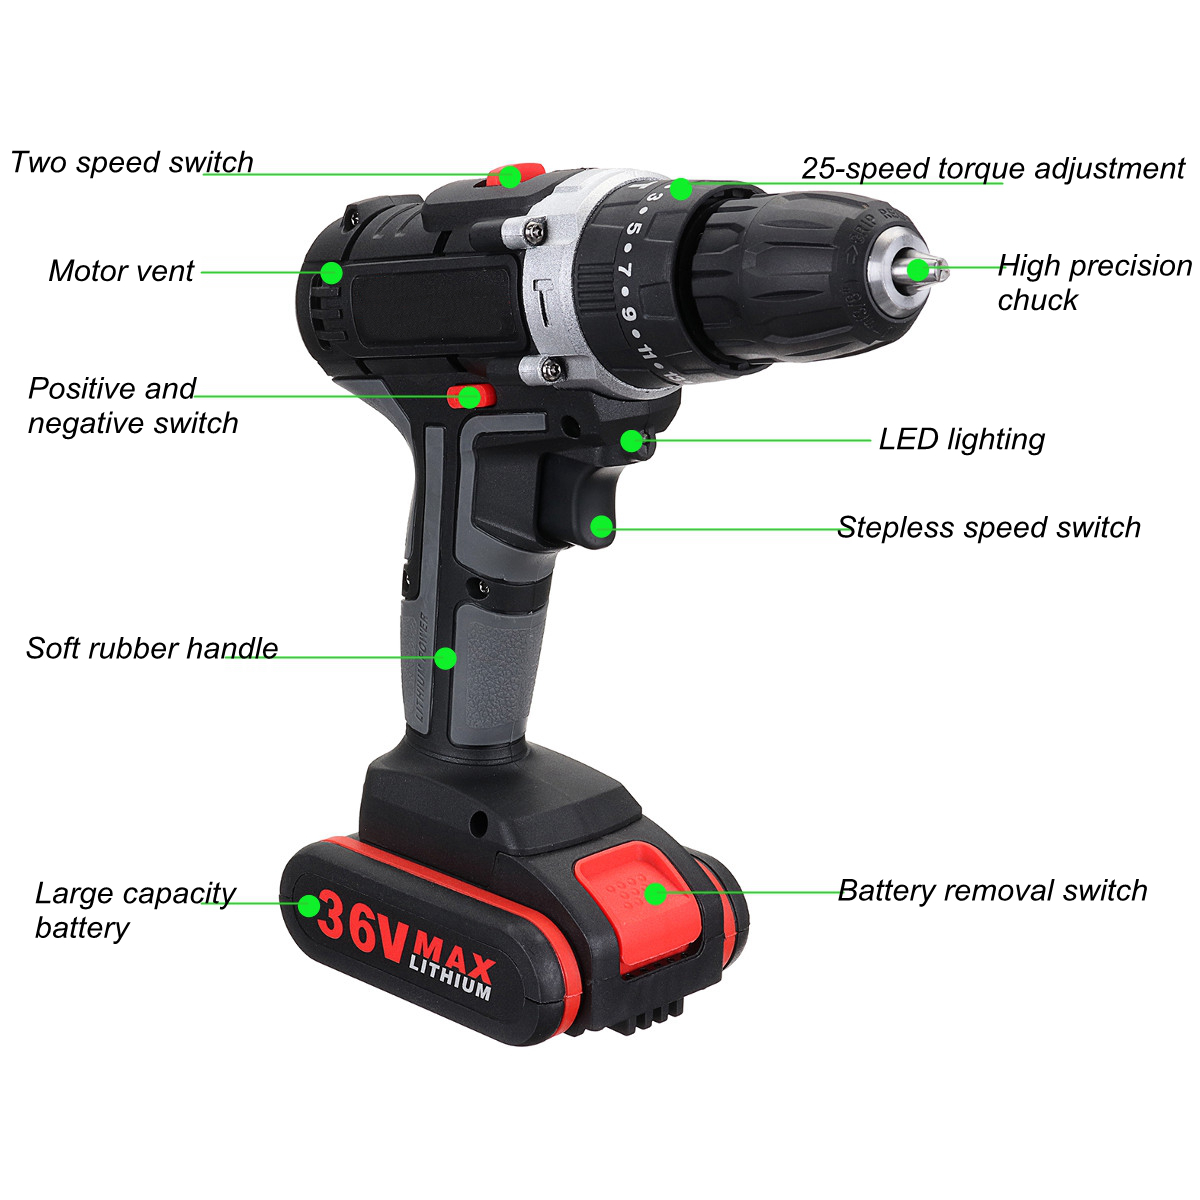 36V-2-Speed-Electric-Cordless-Drill-LED-Screwdriver-Hammer-Impact-With-2pcs-Battery-1796244-8